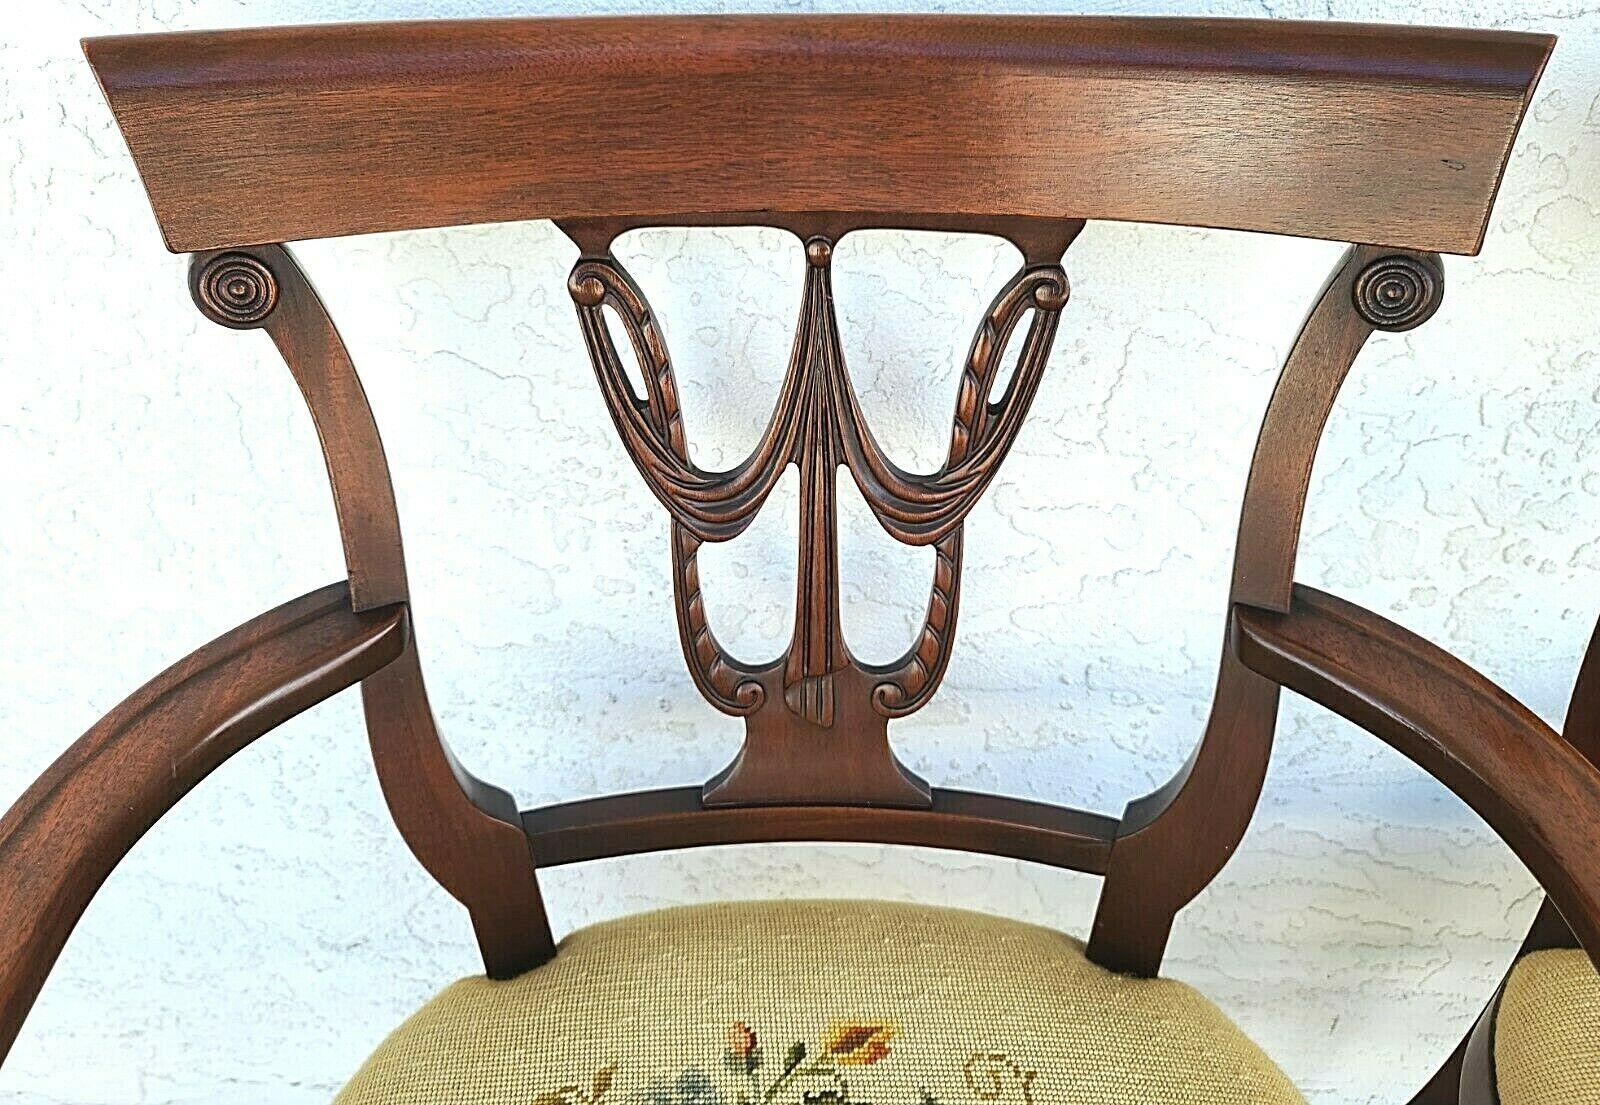 Set of 6 antique 1920s Italian Regency mahogany dining chairs with needlepoint seats
The needlepoint was done by the original owner and each seat has a different pattern.
Set includes 2 arm and 4 side chairs

Approximate Measurements in